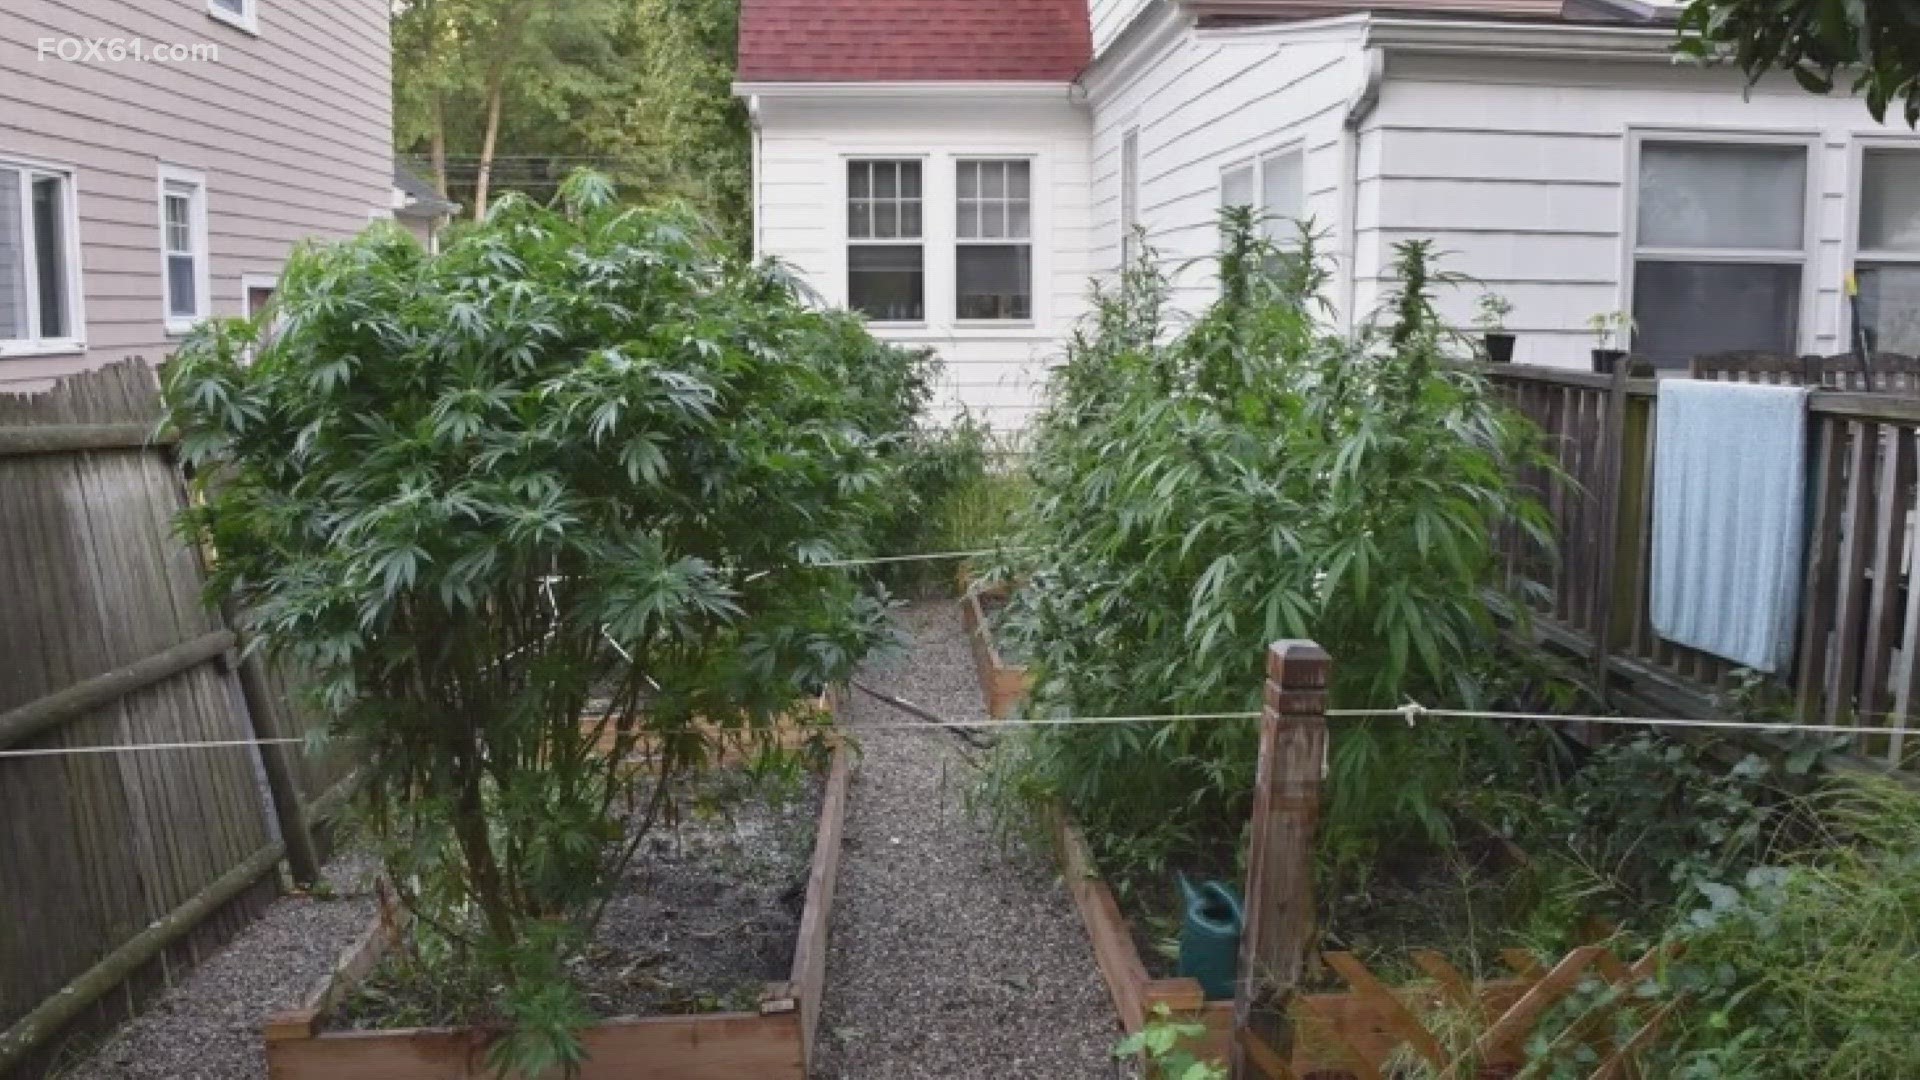 A West Hartford man was allegedly growing more than 30 plants of marijuana in his backyard, police said.